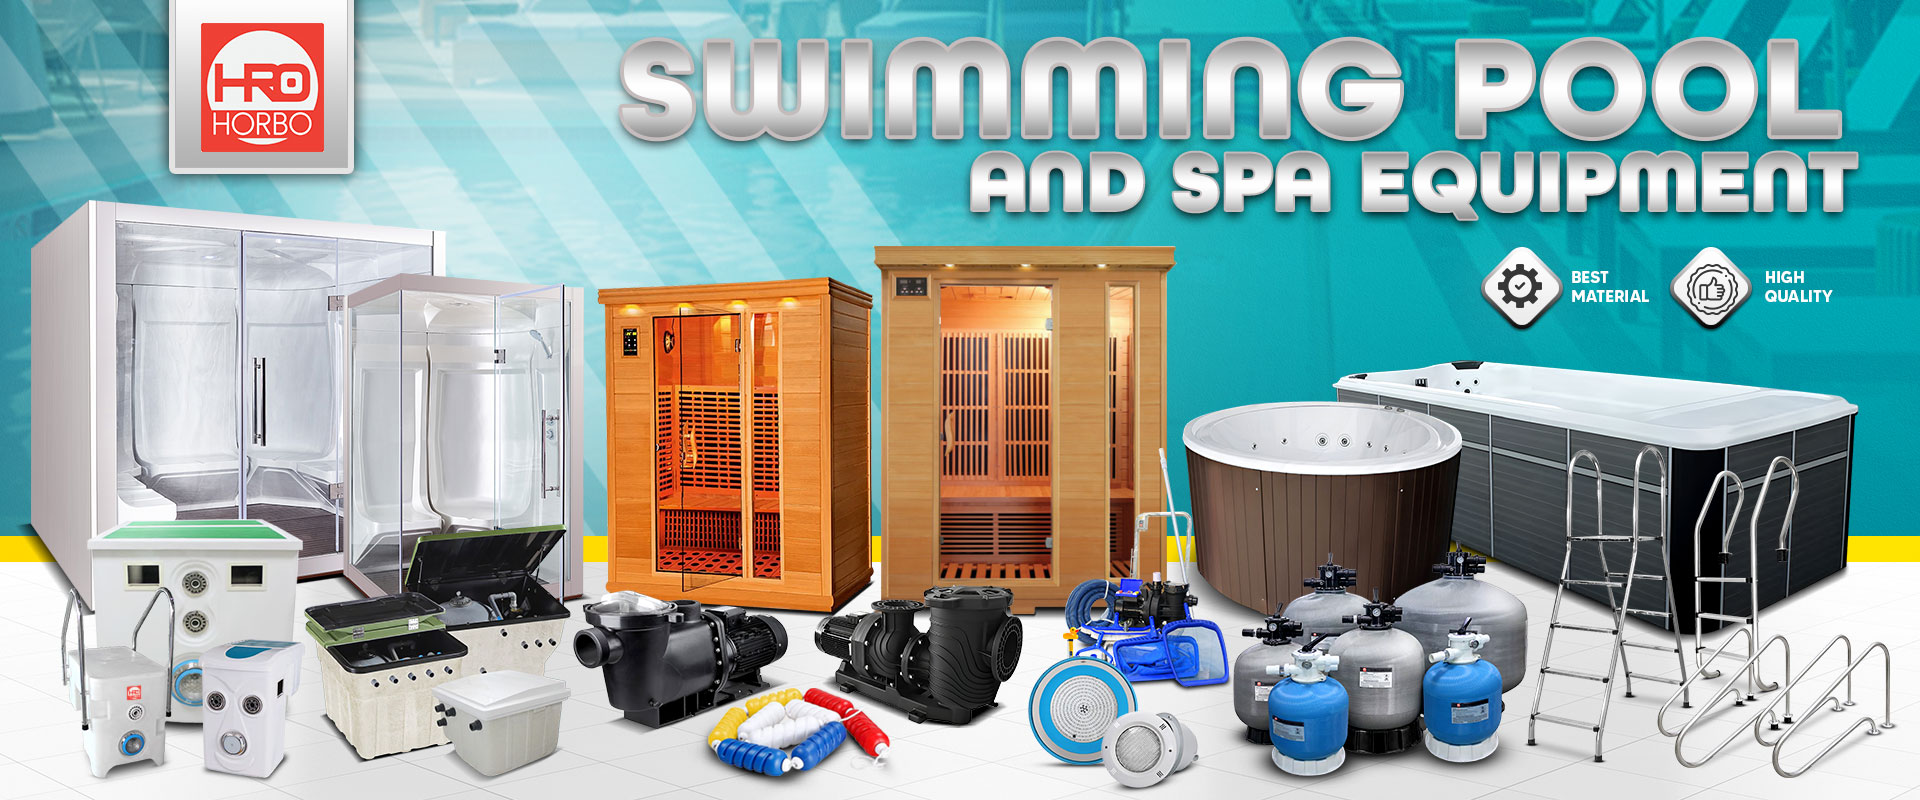 Horbo Swimming Pool and SPA Equipment